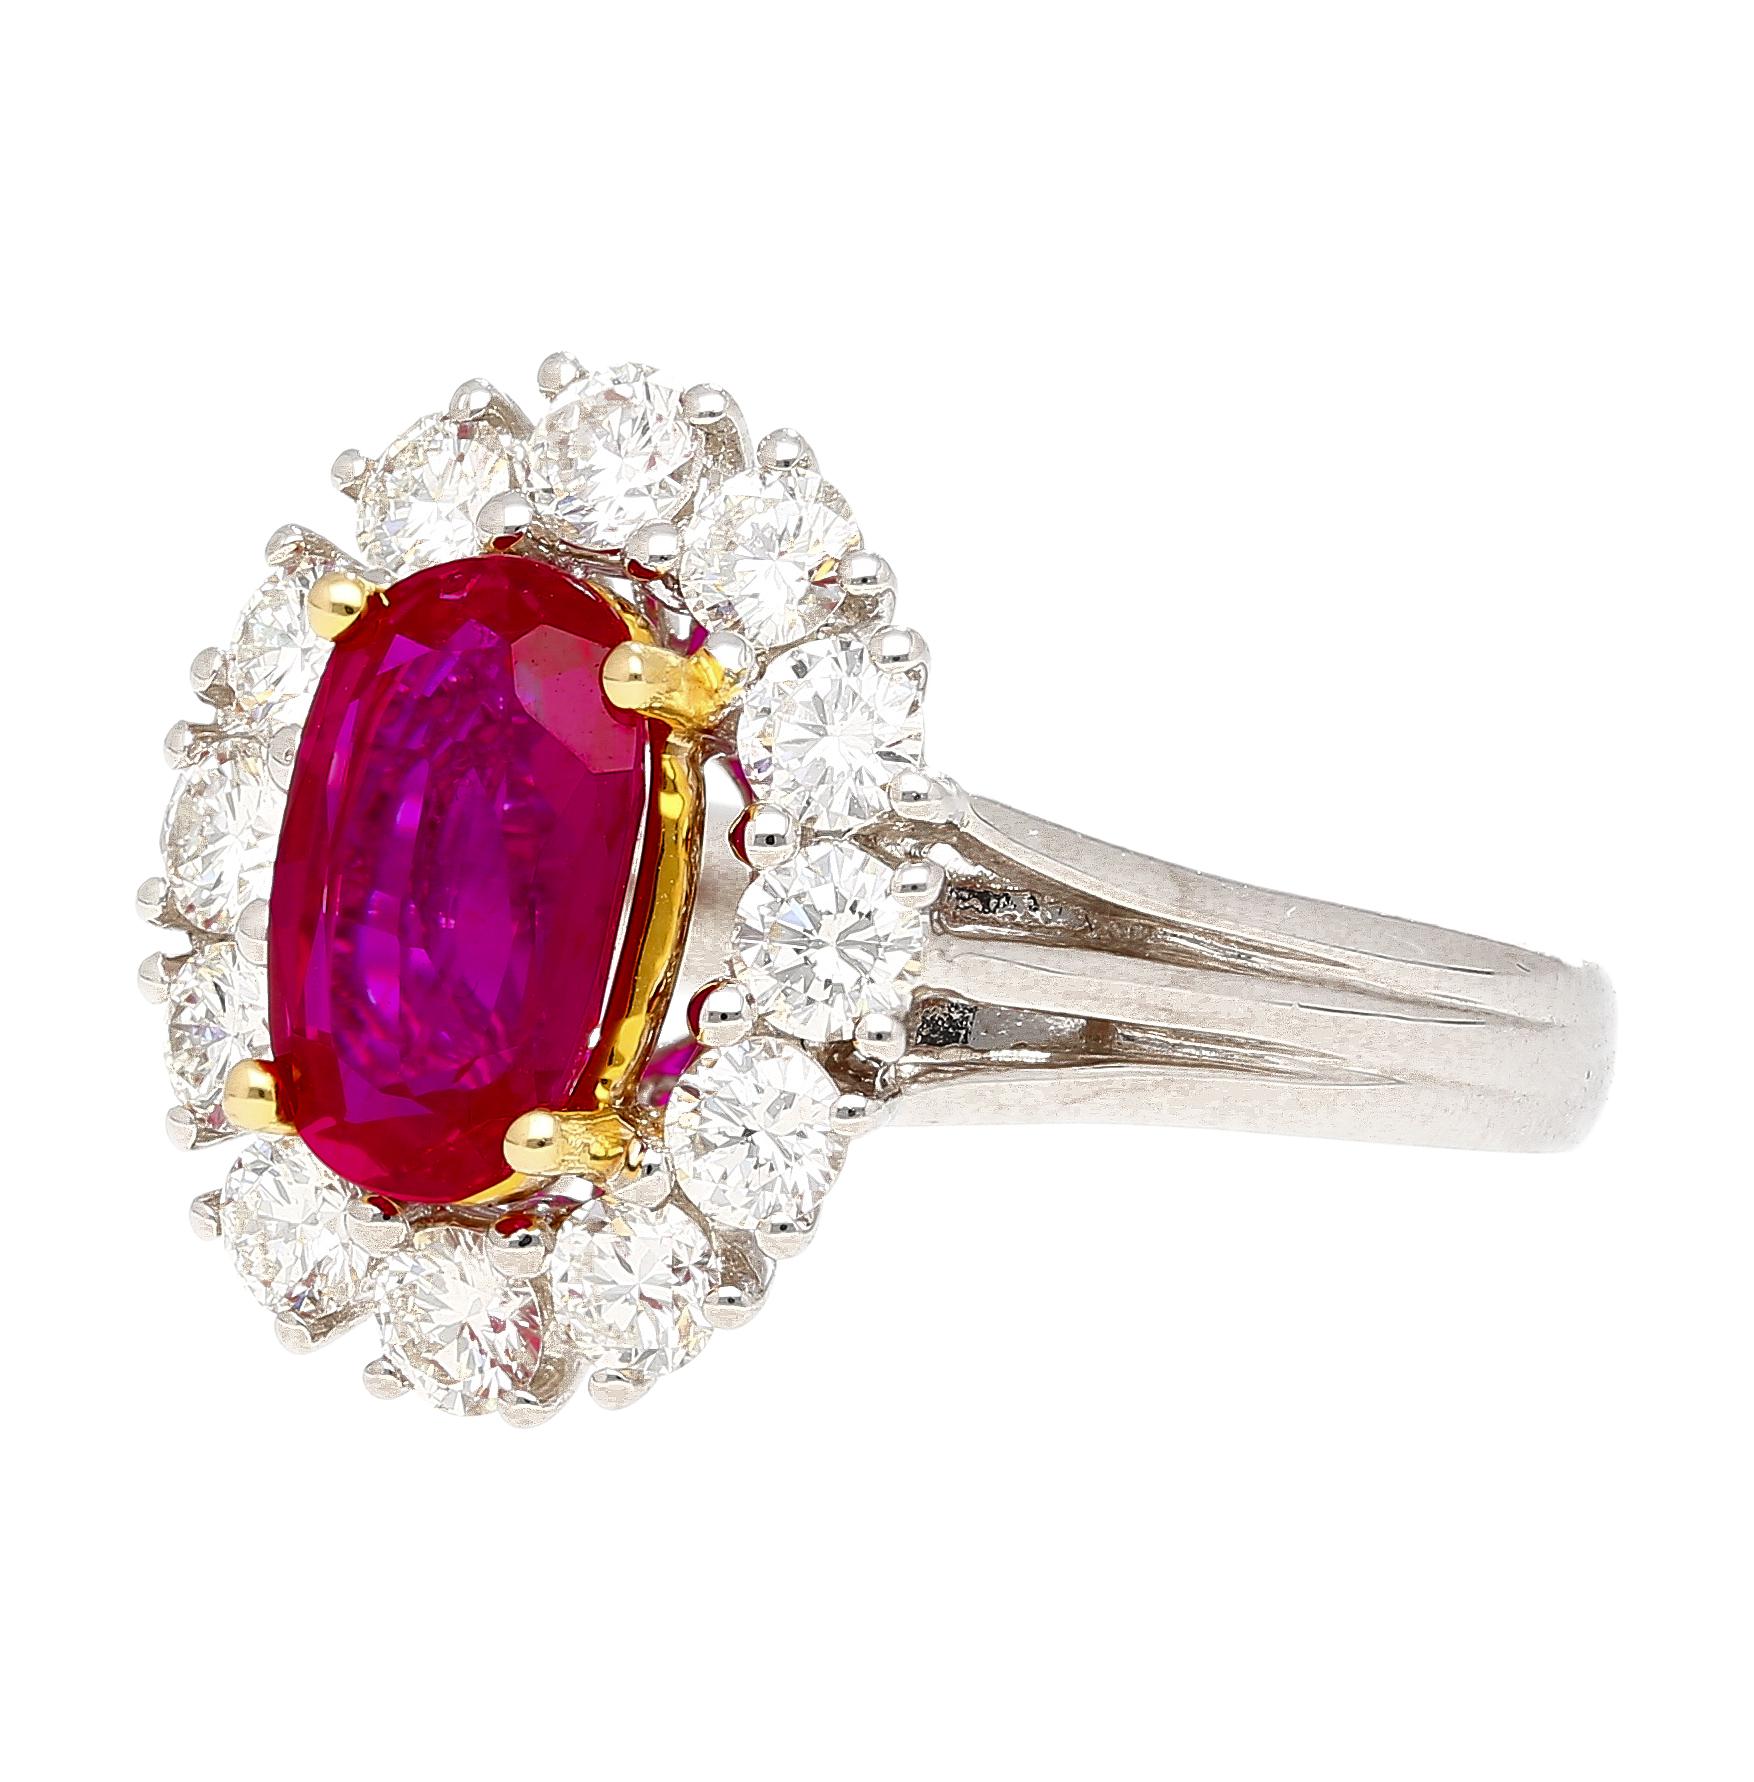 2.09 carat oval cut no heat ruby and diamond halo ring. Adorned with 12 round cut diamonds forming a halo, totaling 1.08 carat. The ruby is prong set in 18k yellow gold and the rest of the ring is crafted in platinum 900. The ring weights 8.81 grams